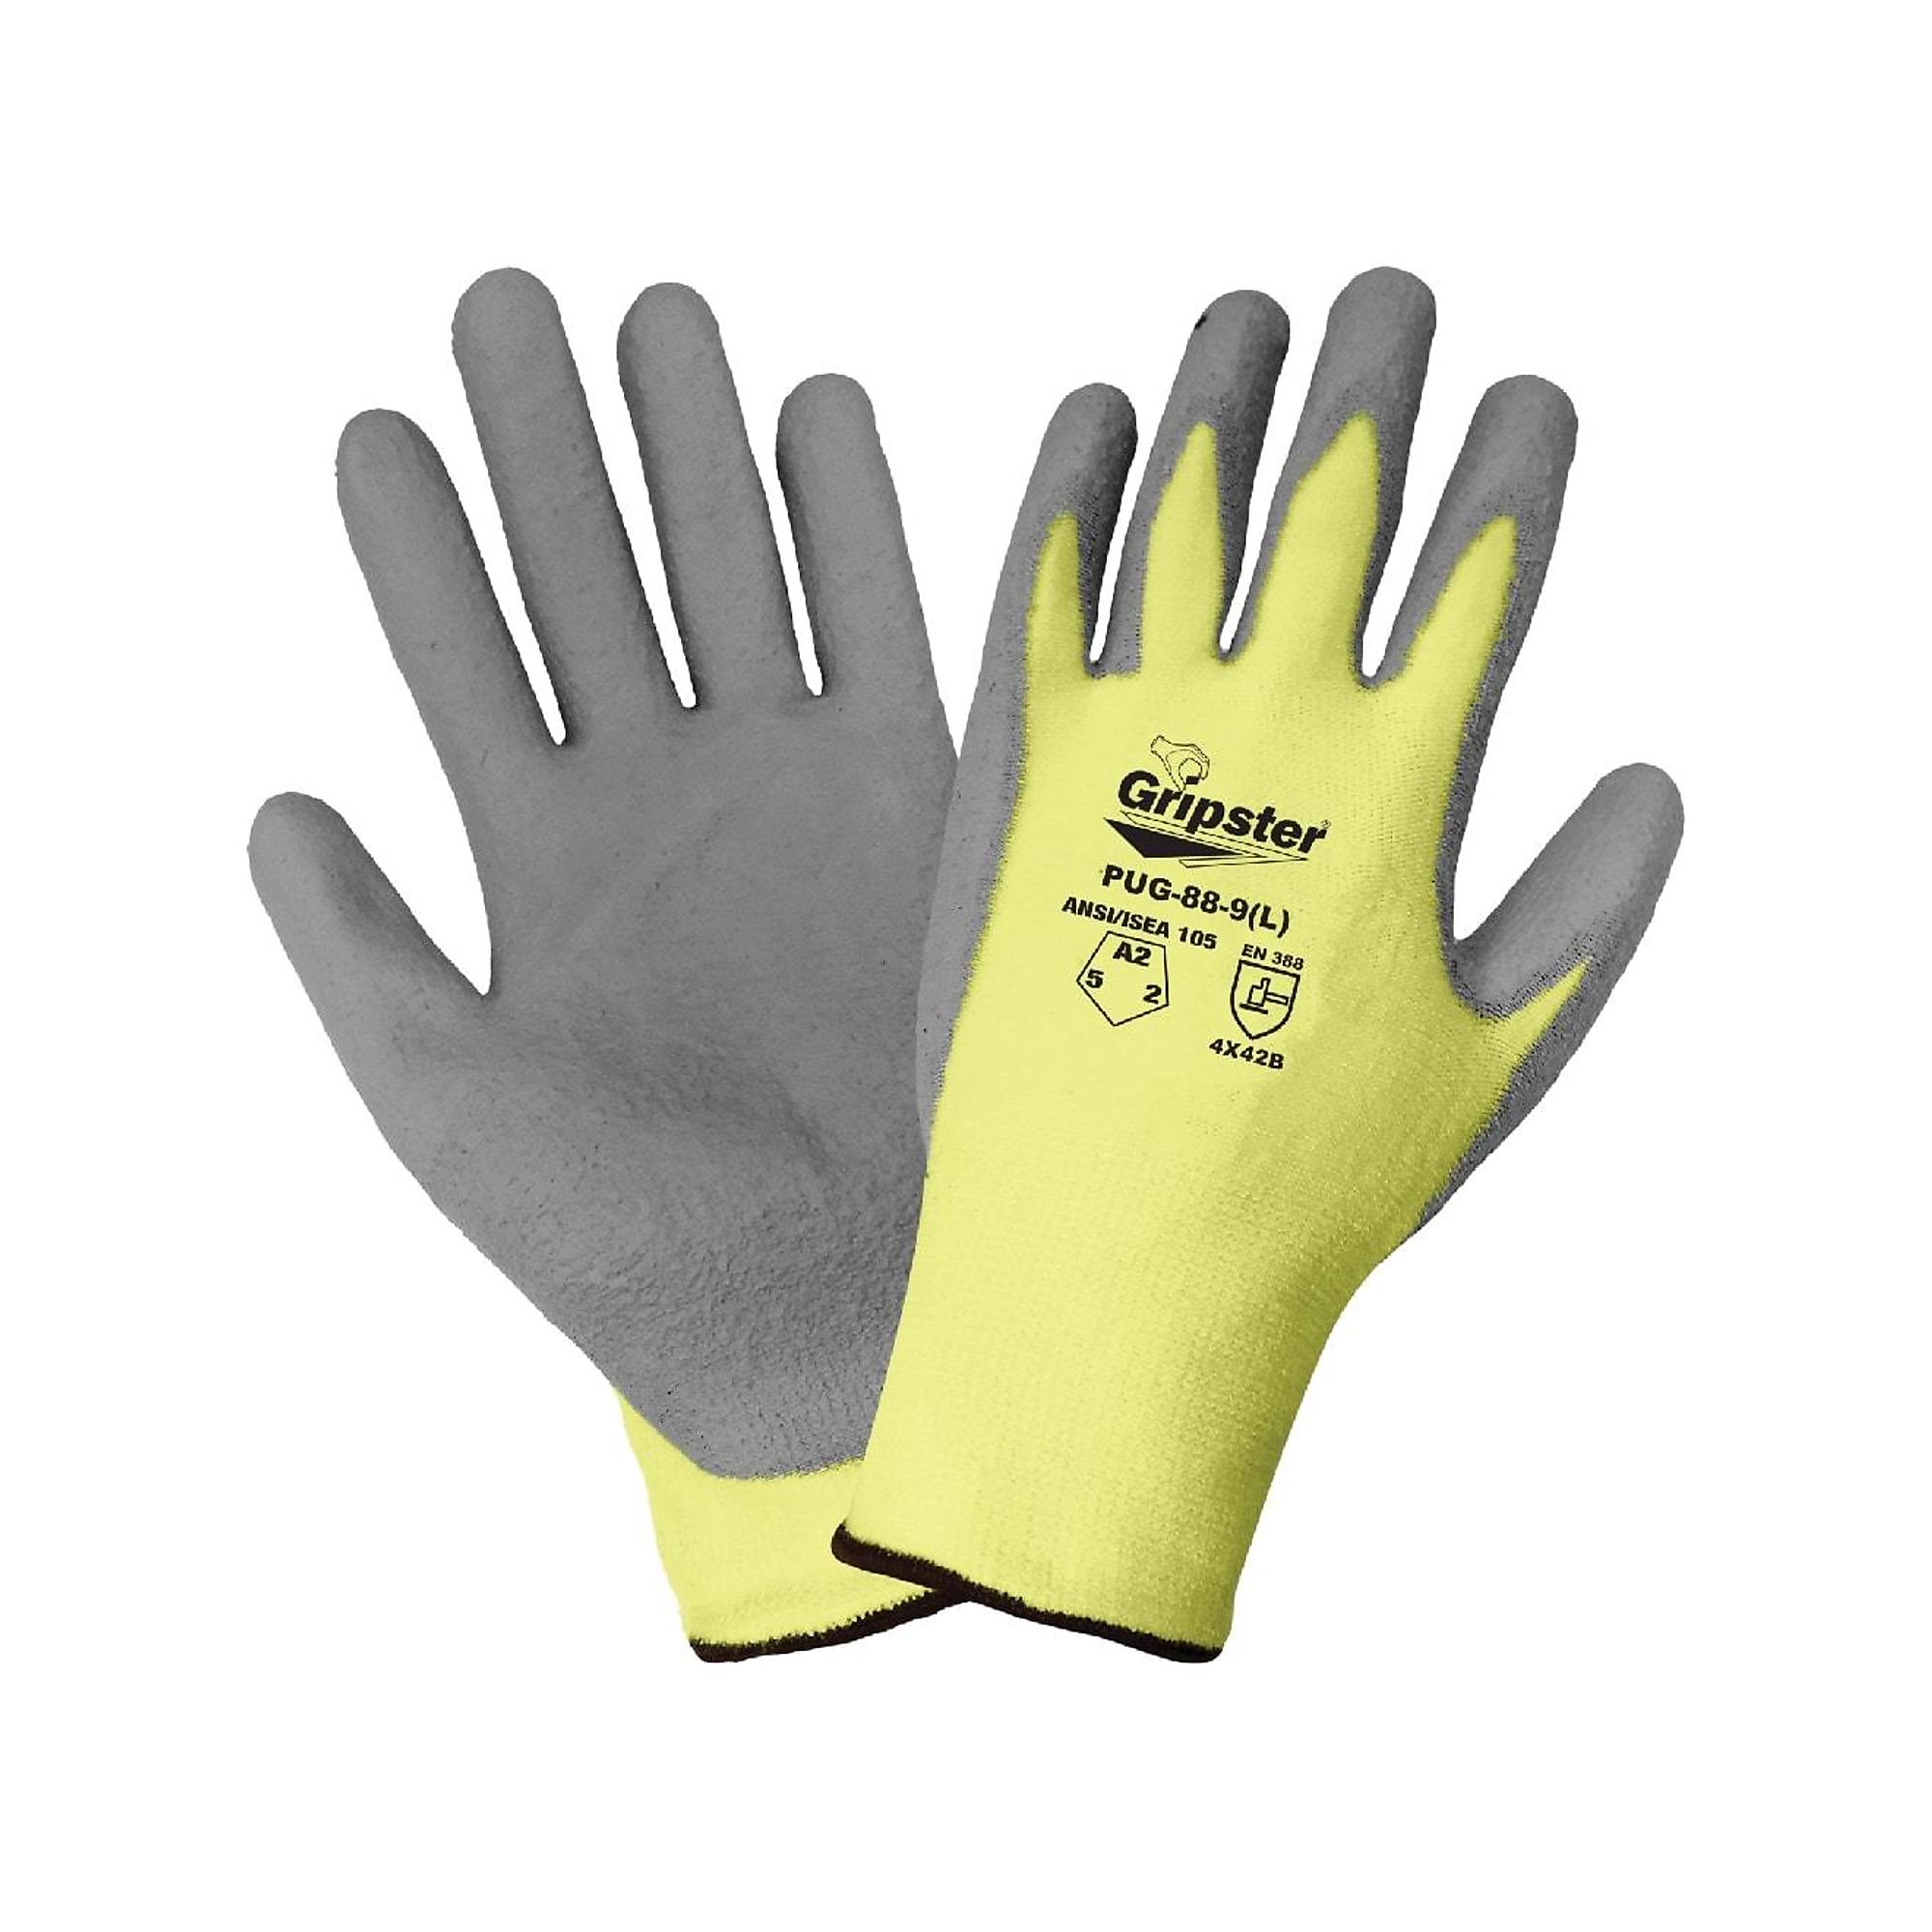 Global Glove Gripster , Yellow, Poly Coated, Cut Resistant A2 Gloves - 12 Pairs, Size XL, Color Yellow/Gray, Included (qty.) 12 Model PUG-88-10(XL)